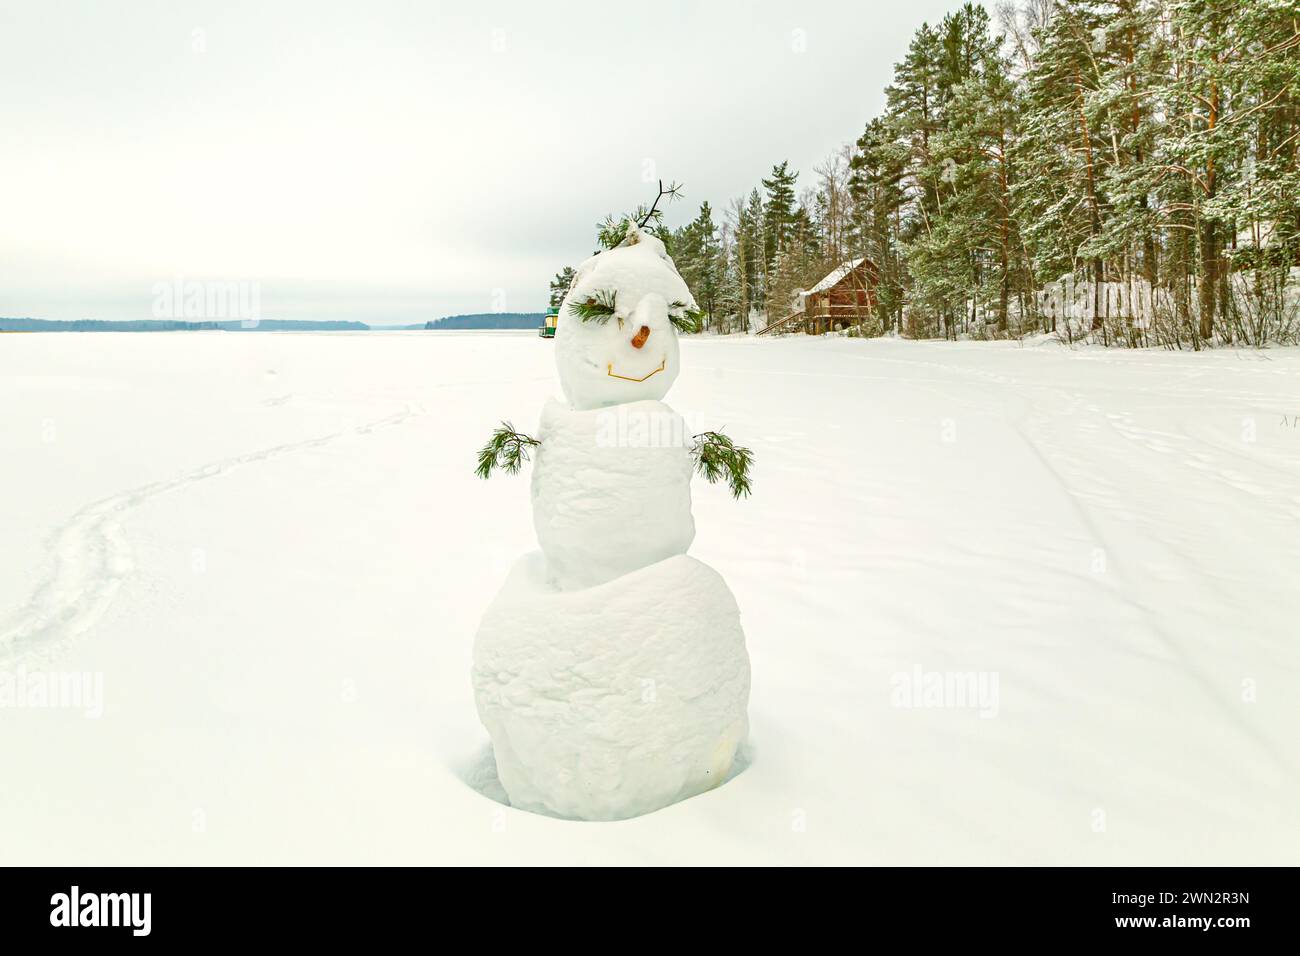 Funny snowman with a field. Symbol of winter, winter fun. Stock Photo